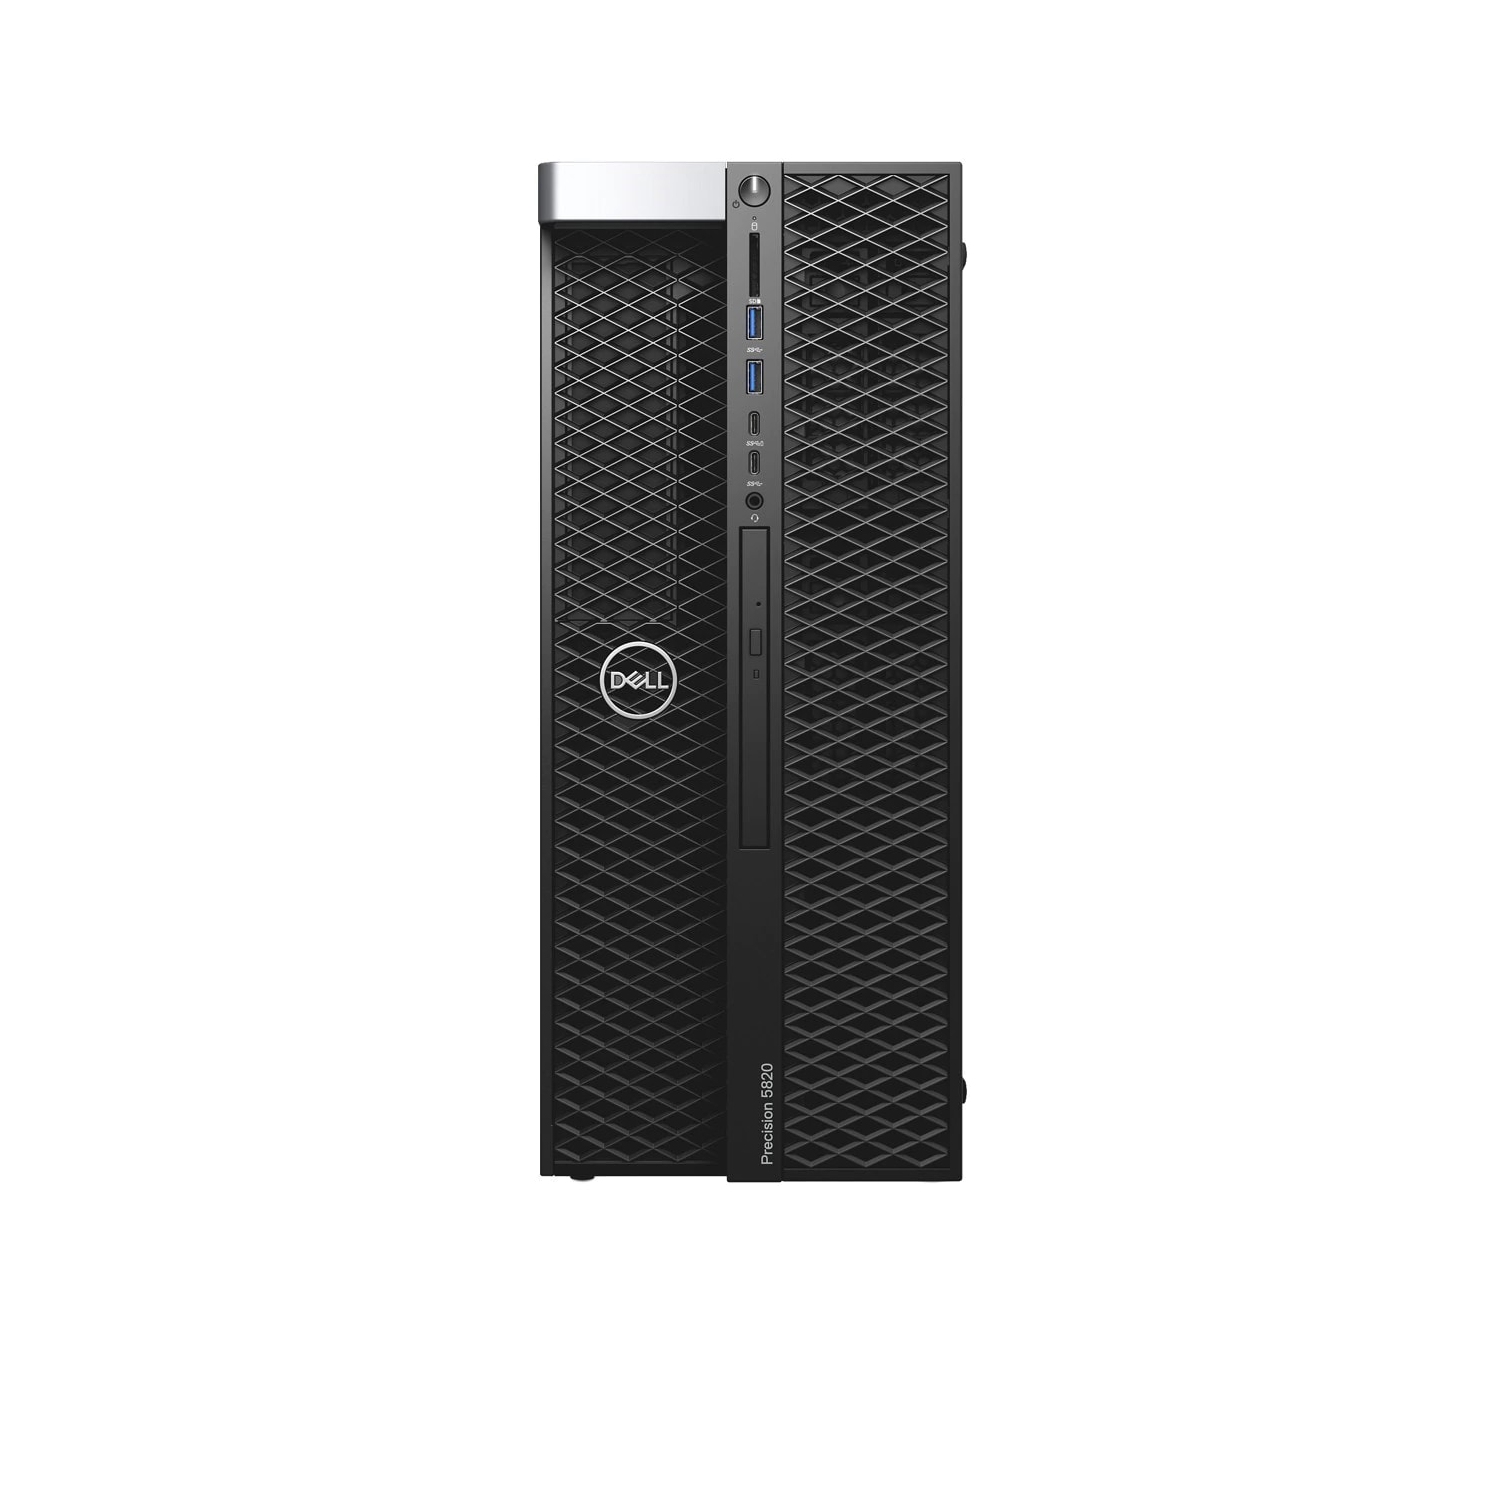 Refurbished (Excellent) - Dell Precision T5820 Workstation Desktop (2018), Core i9, 1TB SSD + 1TB SSD, 64GB RAM, RTX 3090, 10 Cores @ 4.5 GHz, 10th Gen CPU Certified